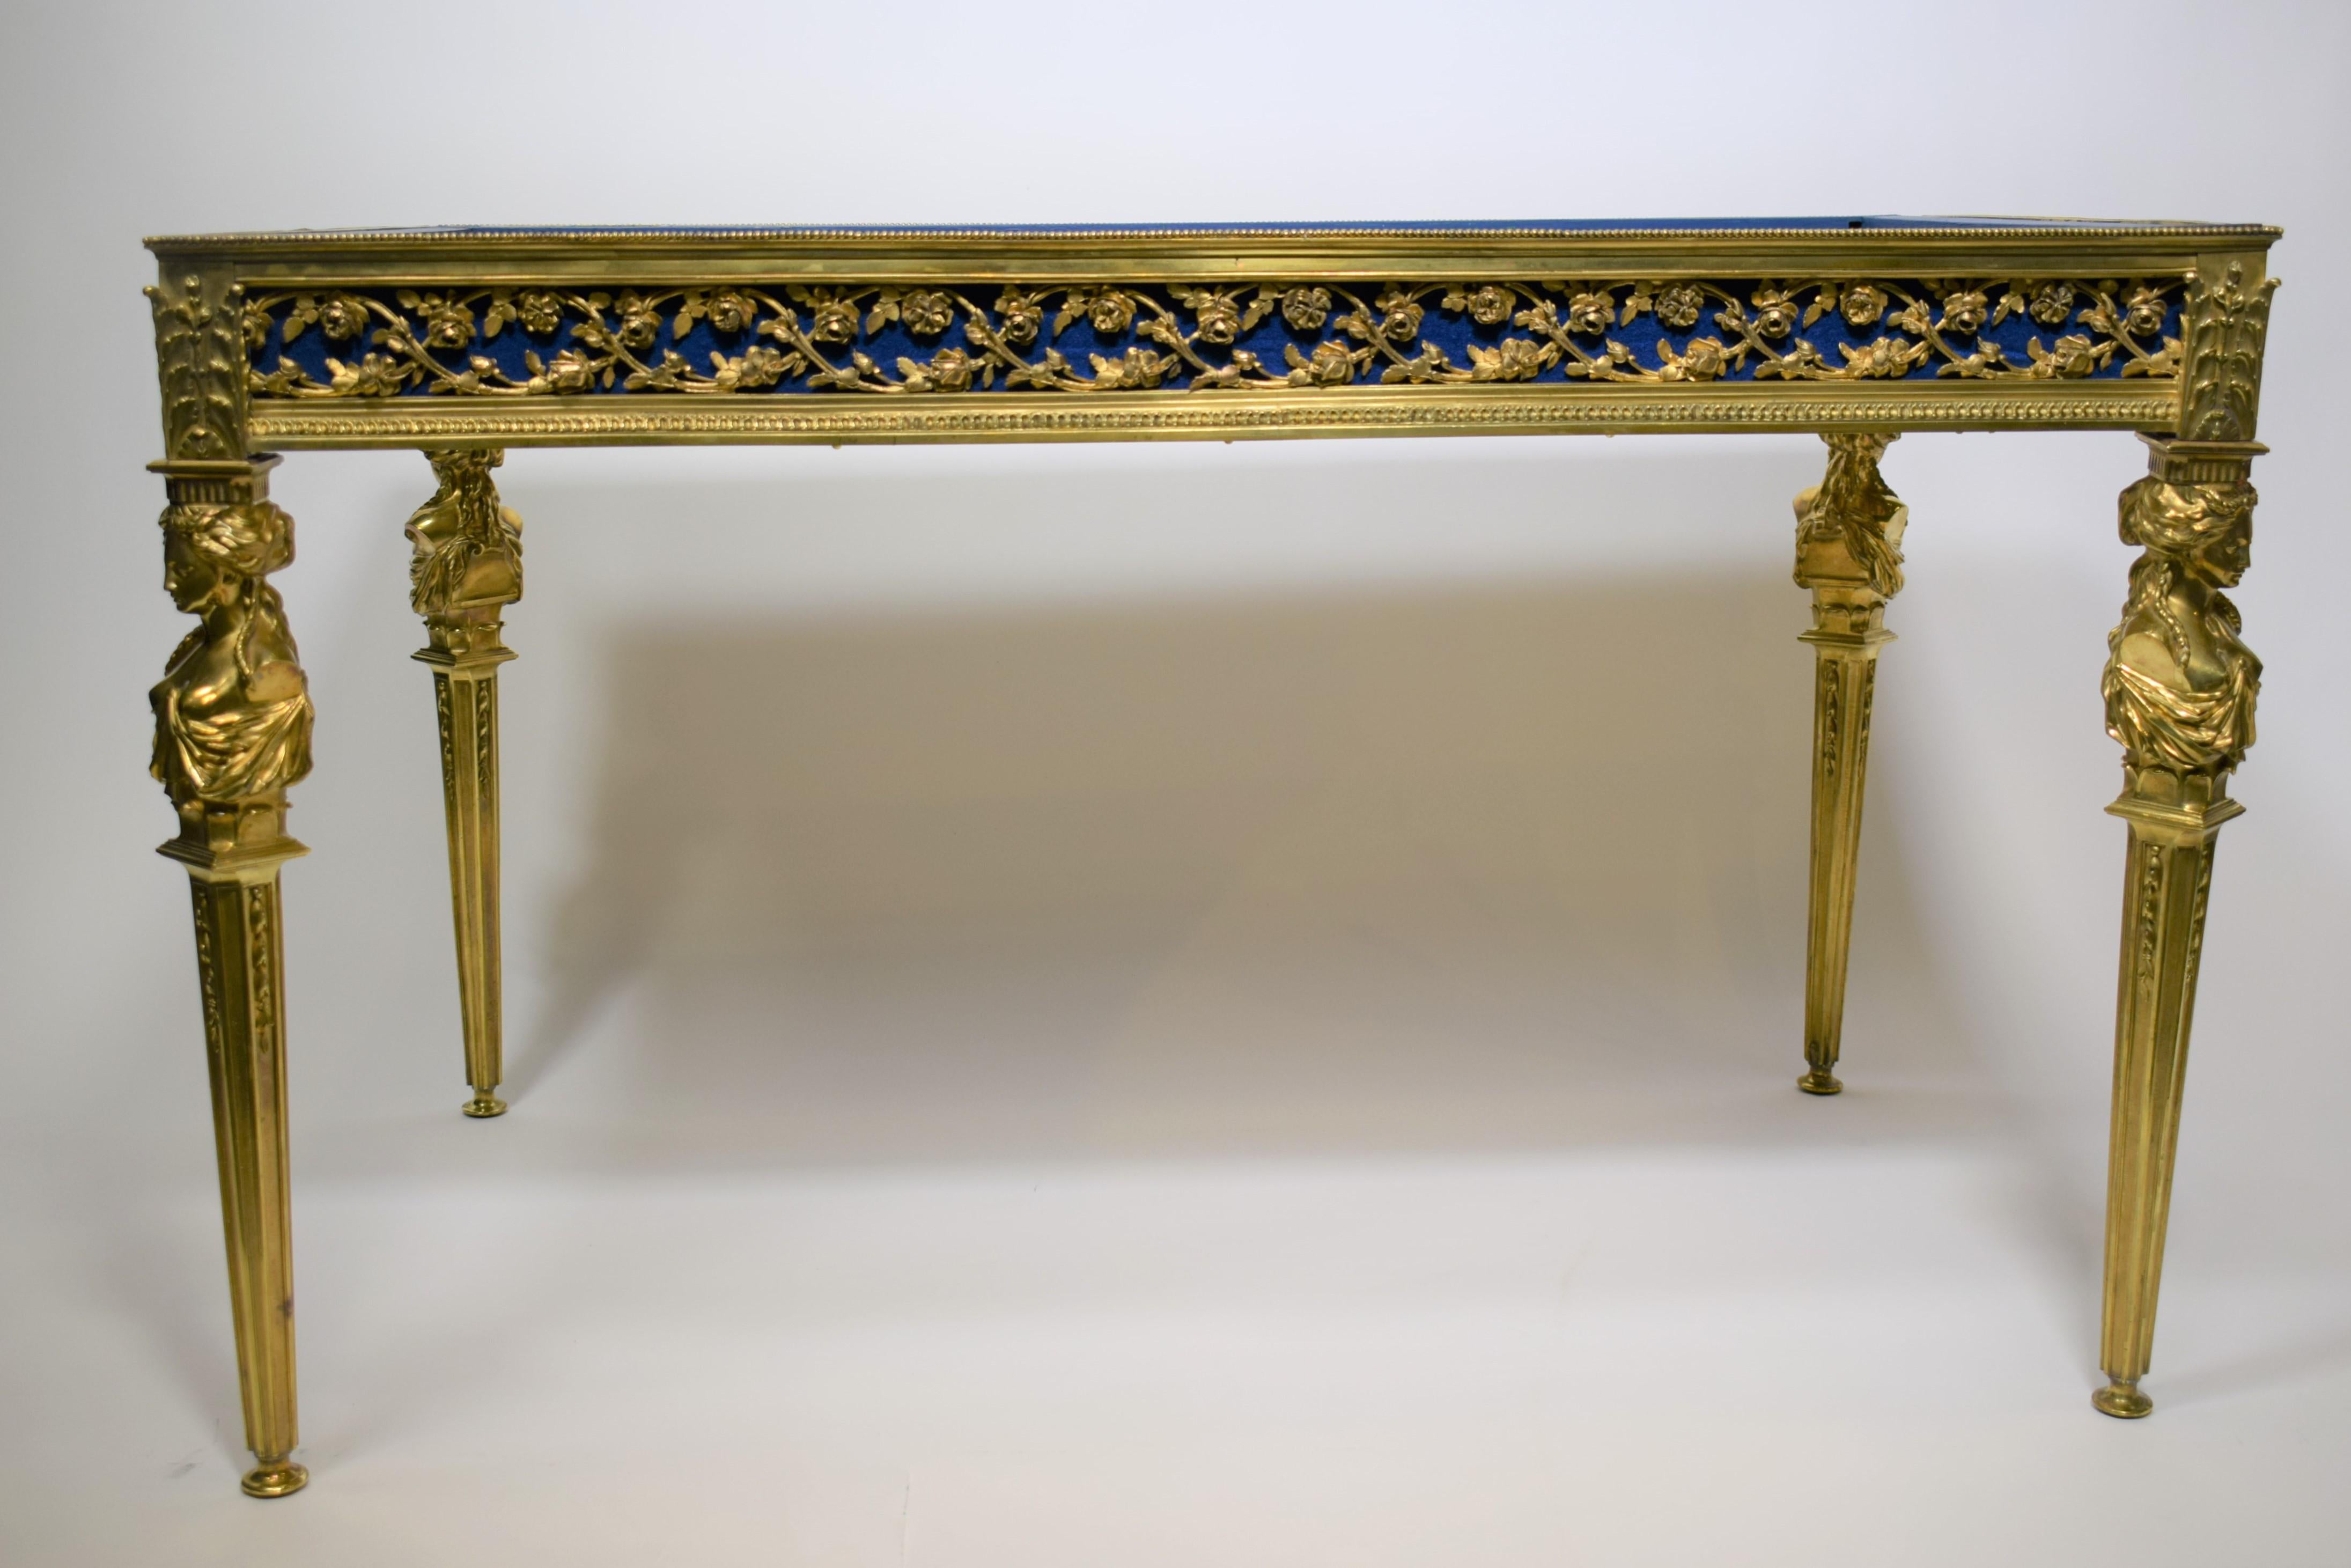 French, 19th century. Cast bronze and glazed vitrine table in the Louis XVI neoclassical taste, having a hinged crystal beveled top with rais-de-coeur edge, open scrolled foliate sides, and rising on tapering draped caryatid-form legs, in the manner